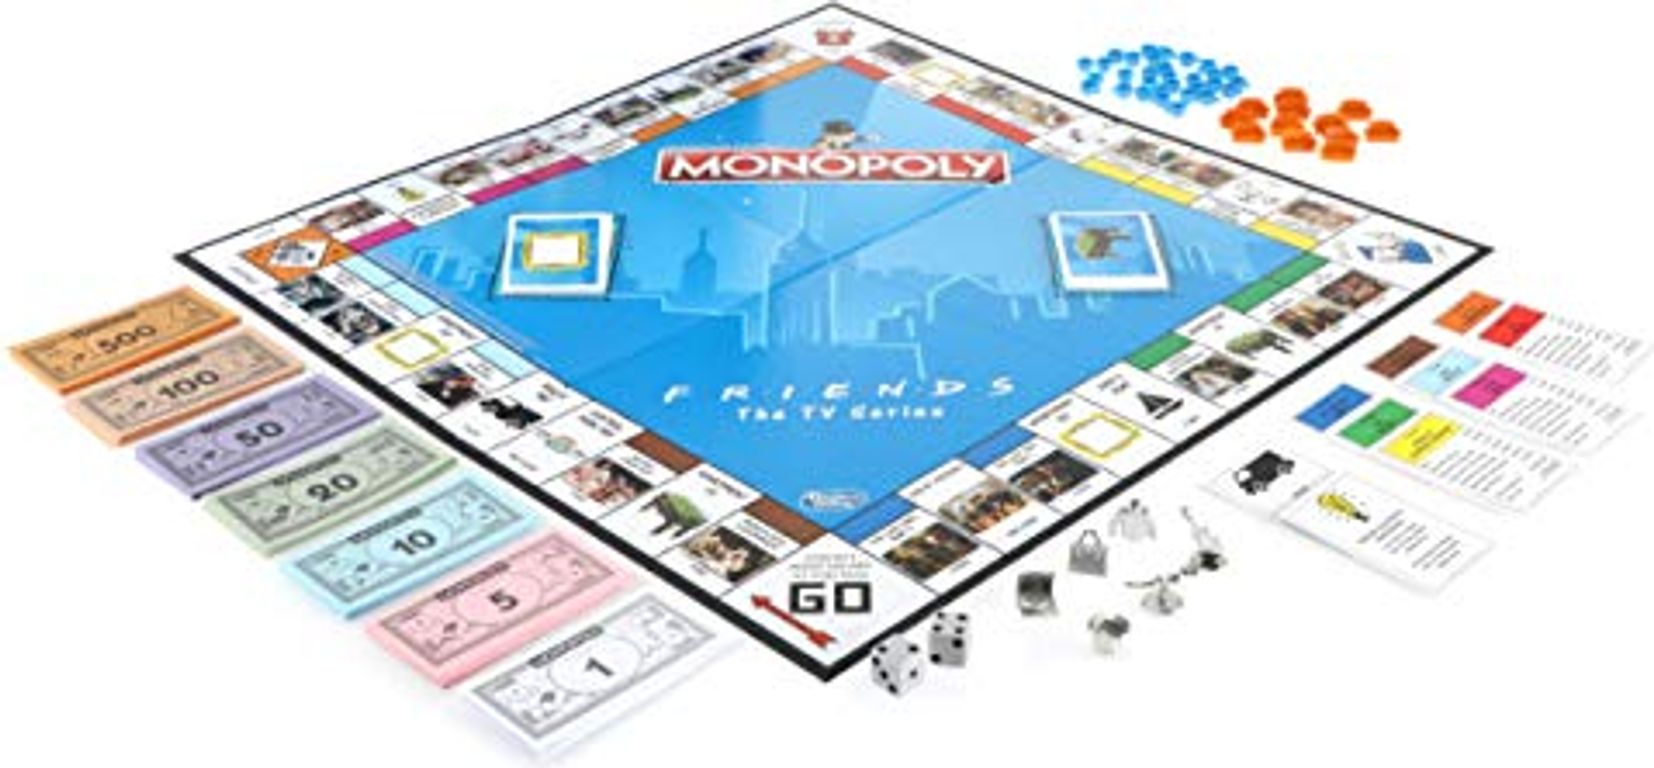 Monopoly: Friends The TV Series components